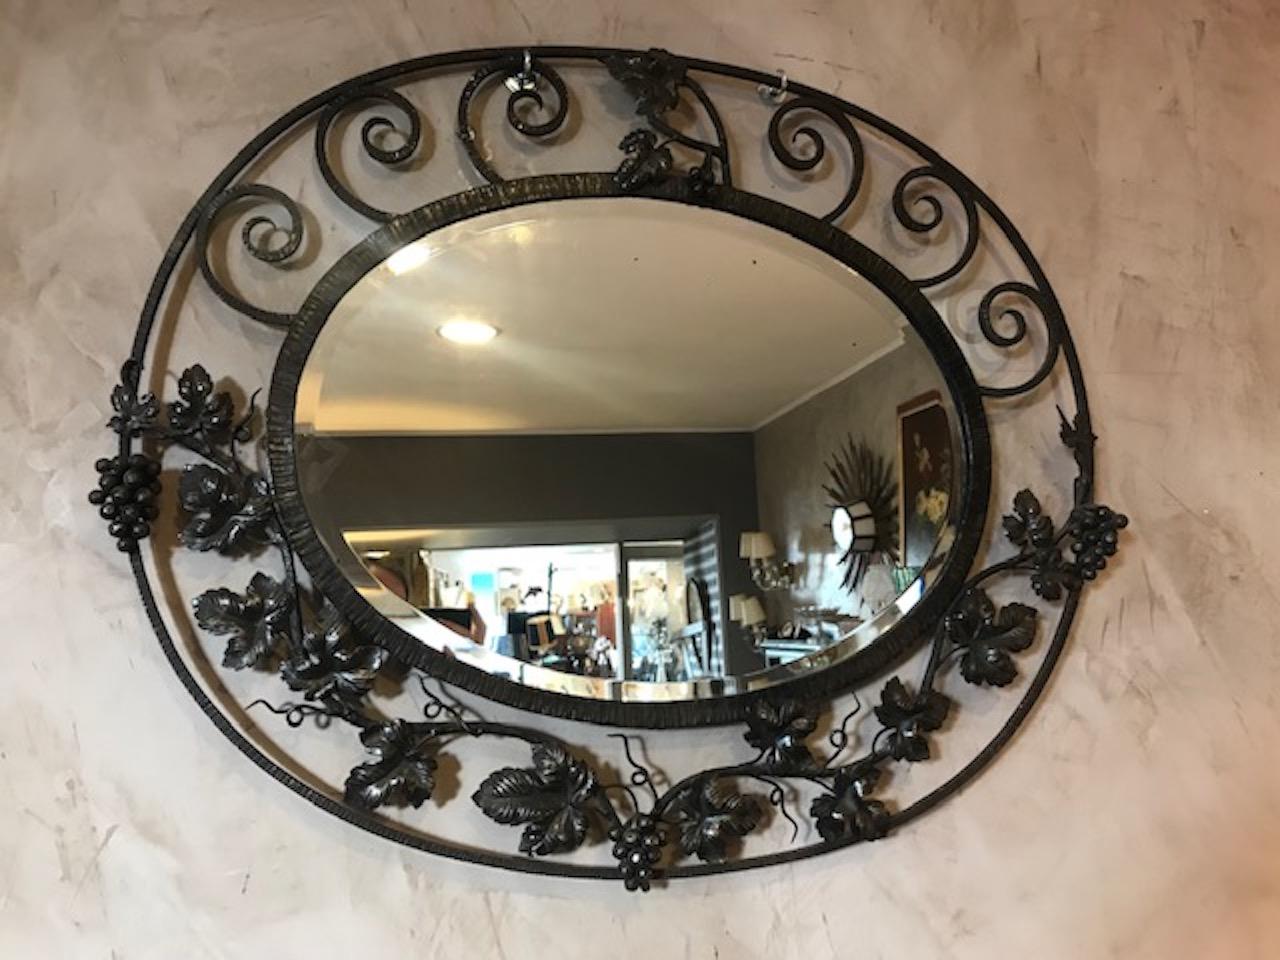 Beautiful and rare 20th century French Art Deco wrought iron beveled mirror from the 1930s.
Very nice work of carved grapes. Can be installed horizontally or vertically.
Nice quality and condition.